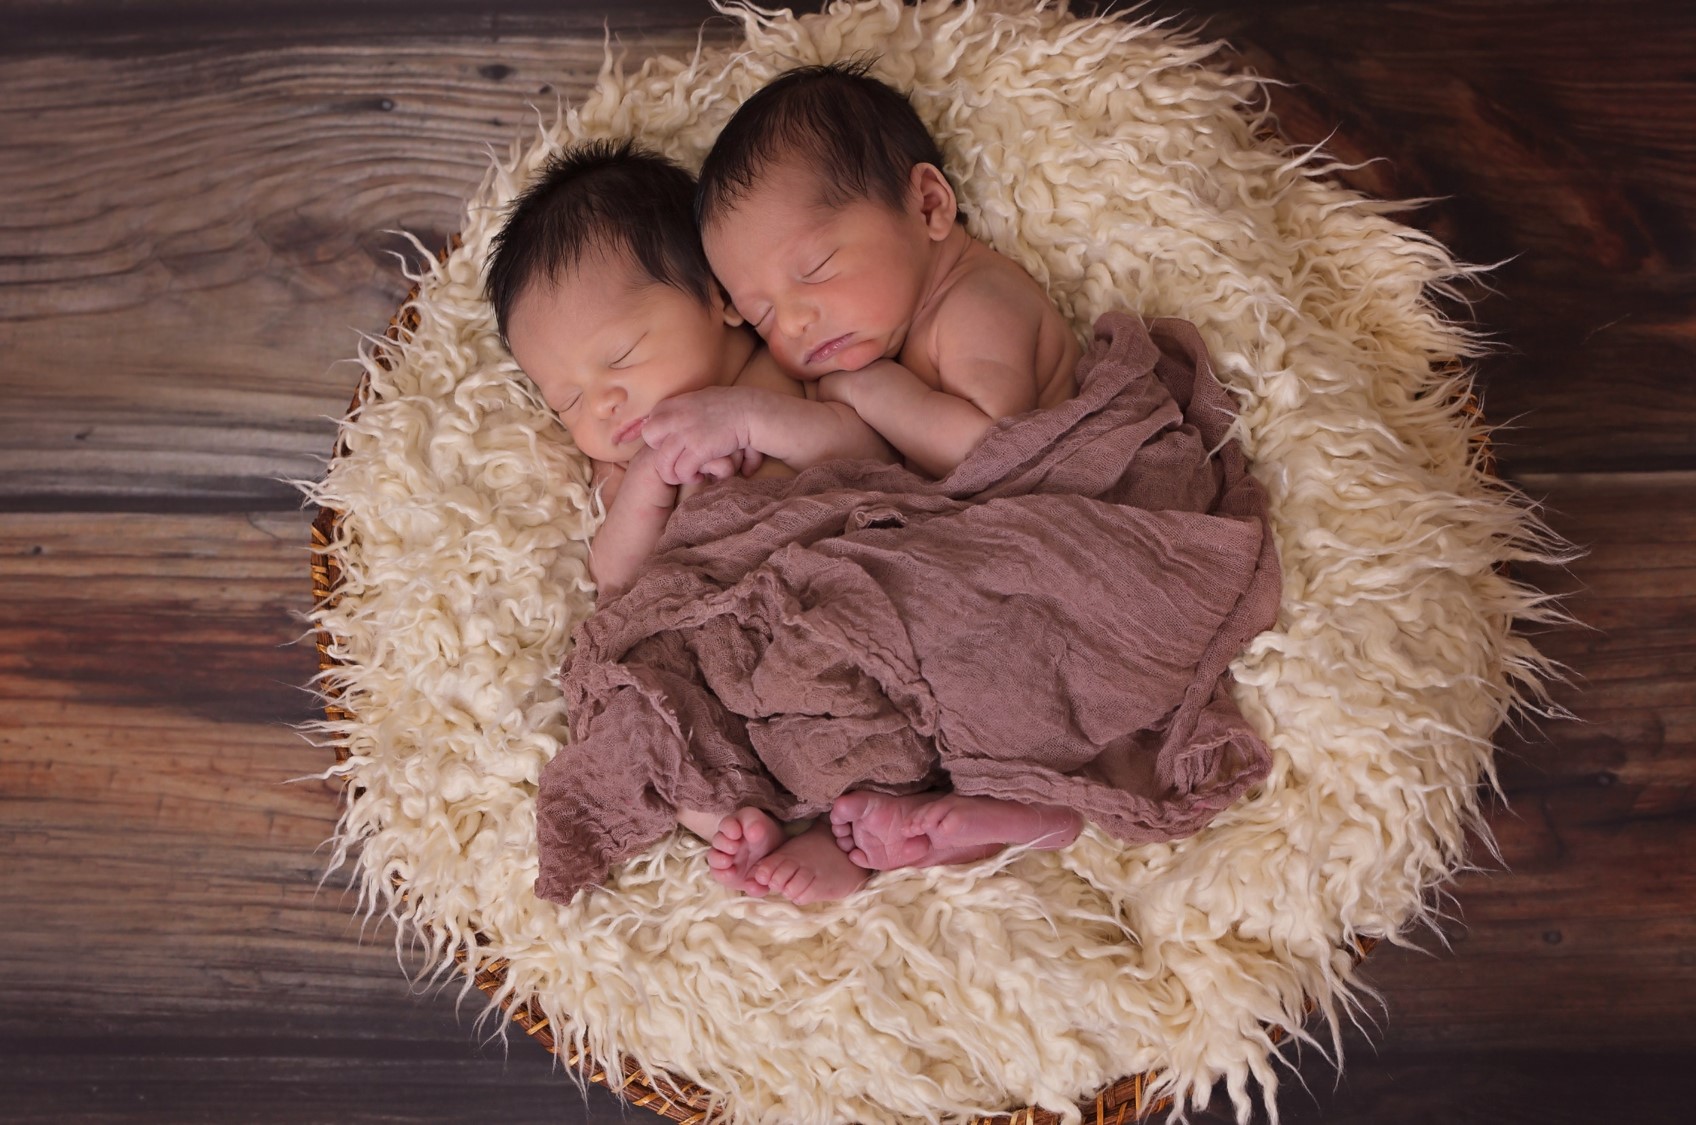 Baby Twins Sleeping Together on a Fluffy Bed Sheet